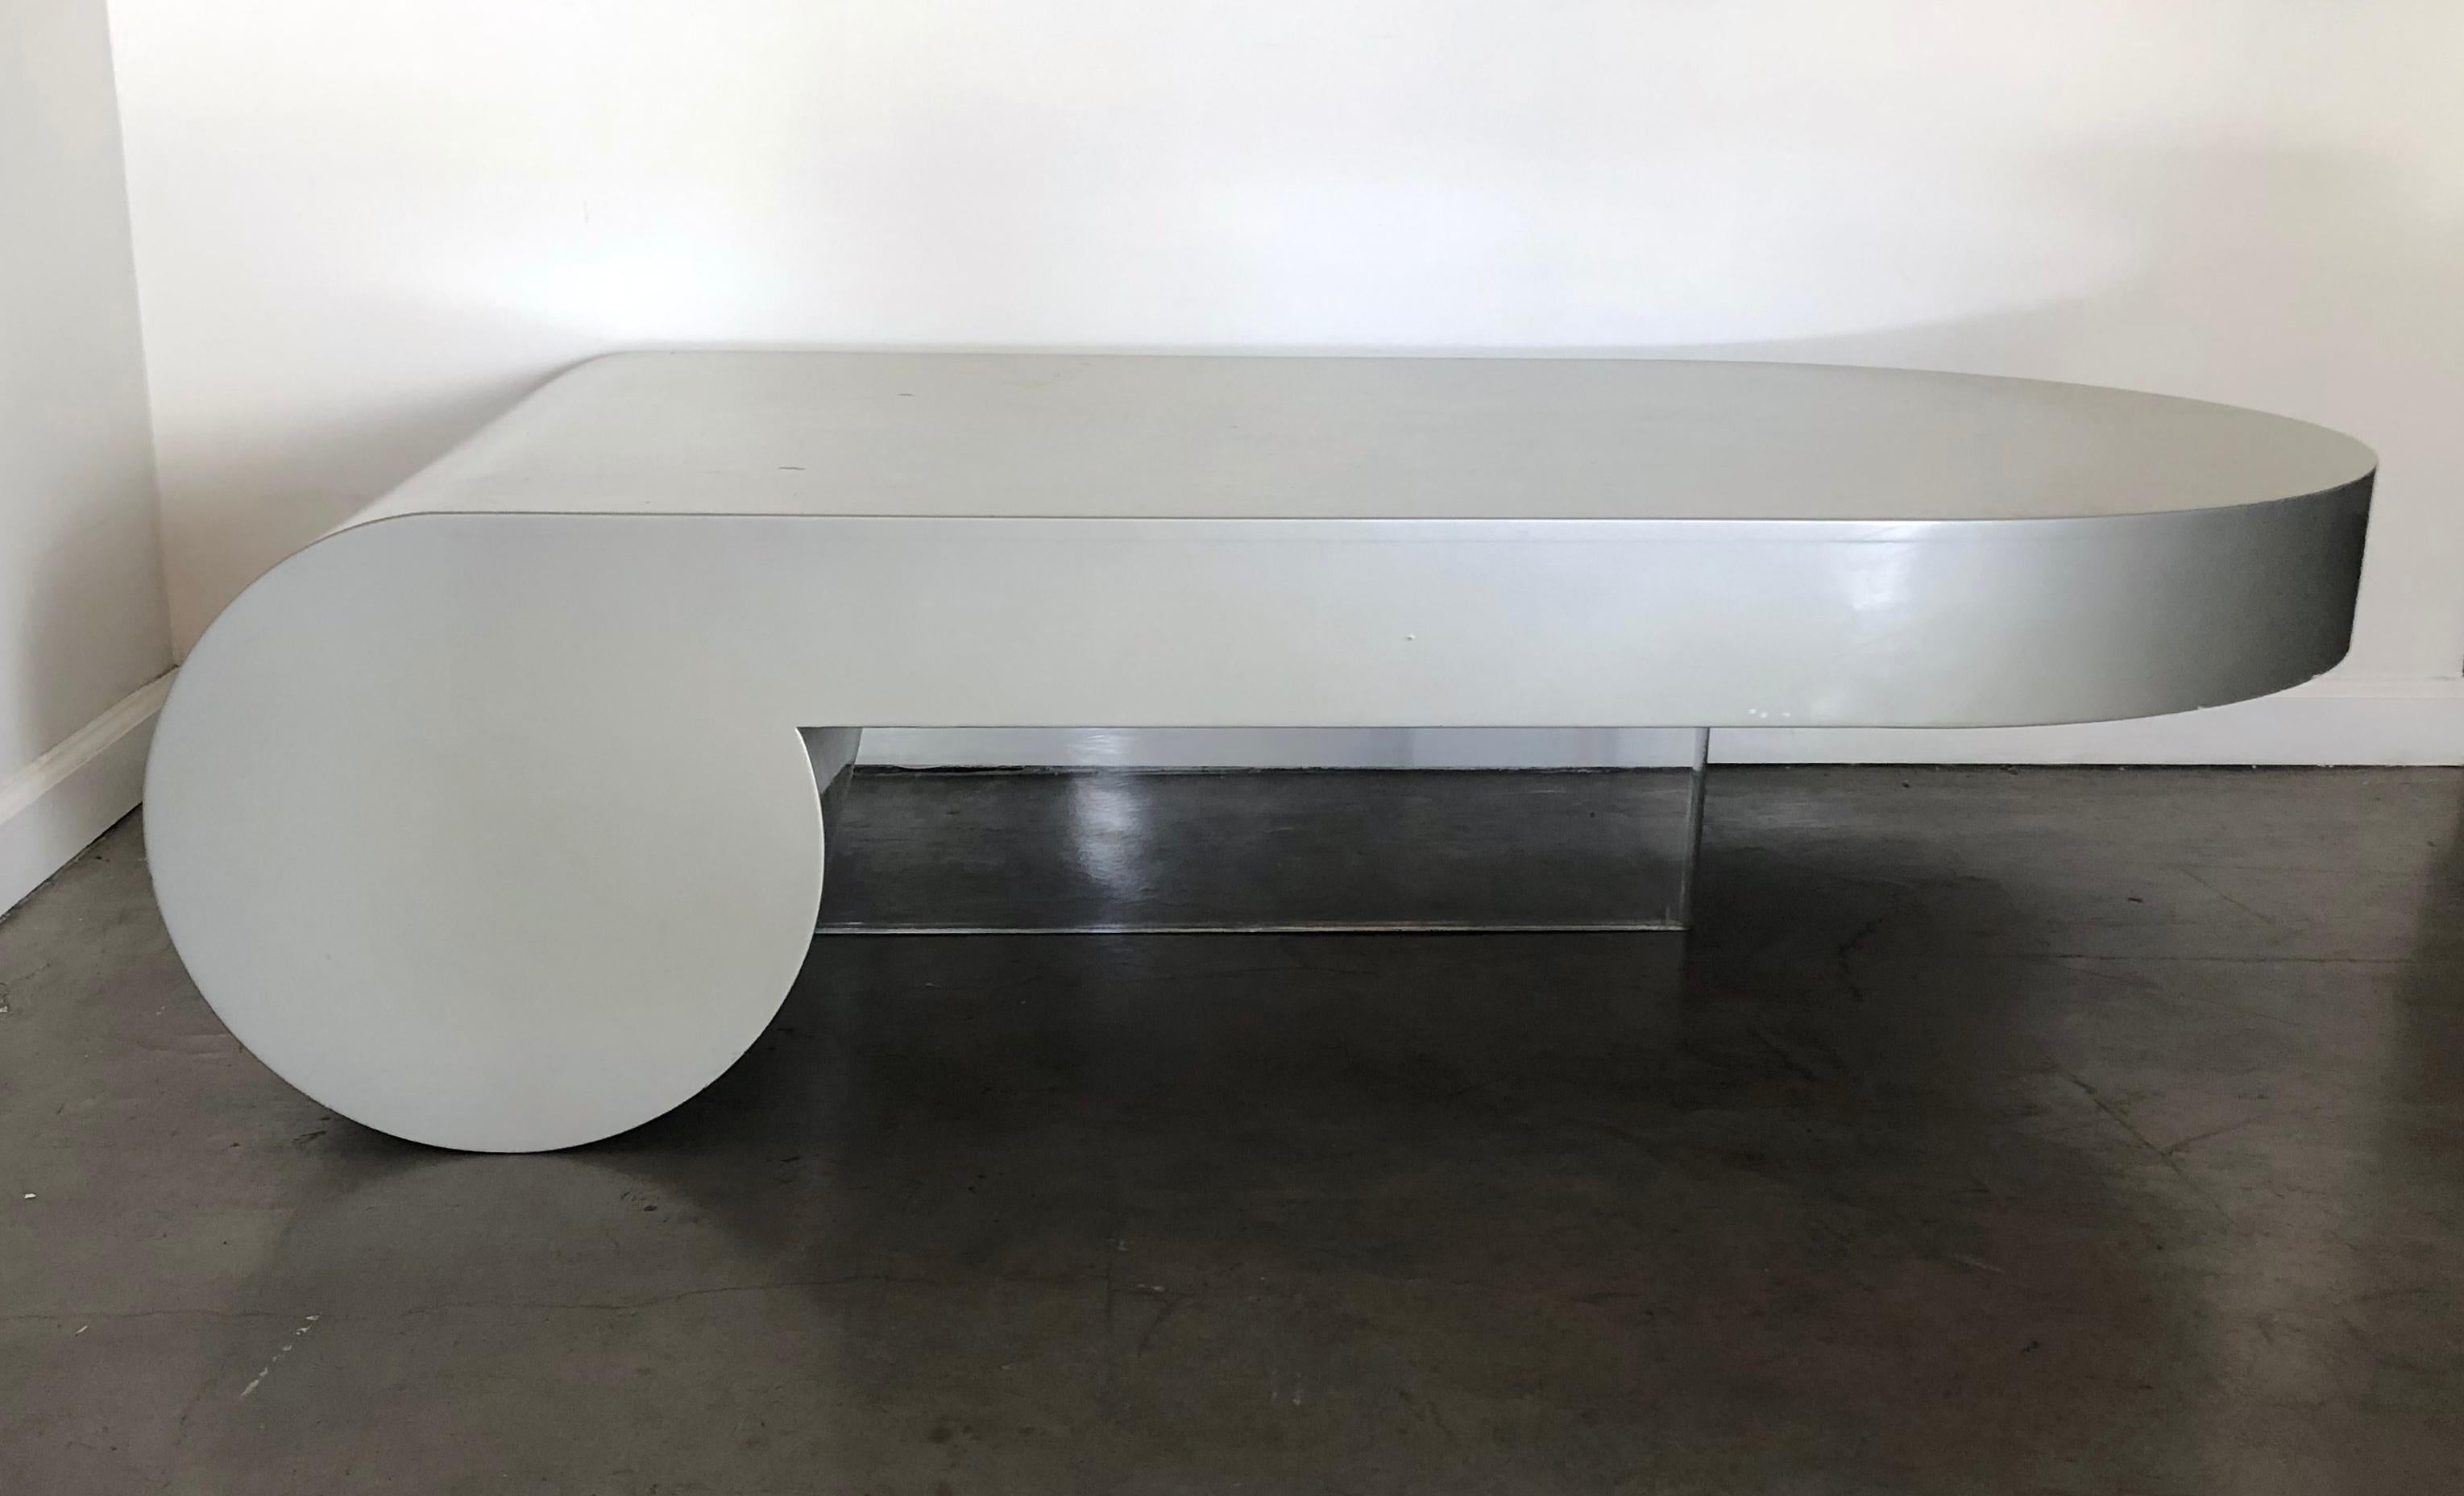 Available at the gallery right now, we have a stunning midcentury lacquered coffee table. This piece is in good condition with wear consistent with age and use. 

Our gallery purchased this piece as a bulk estate buy. The estate we purchased this